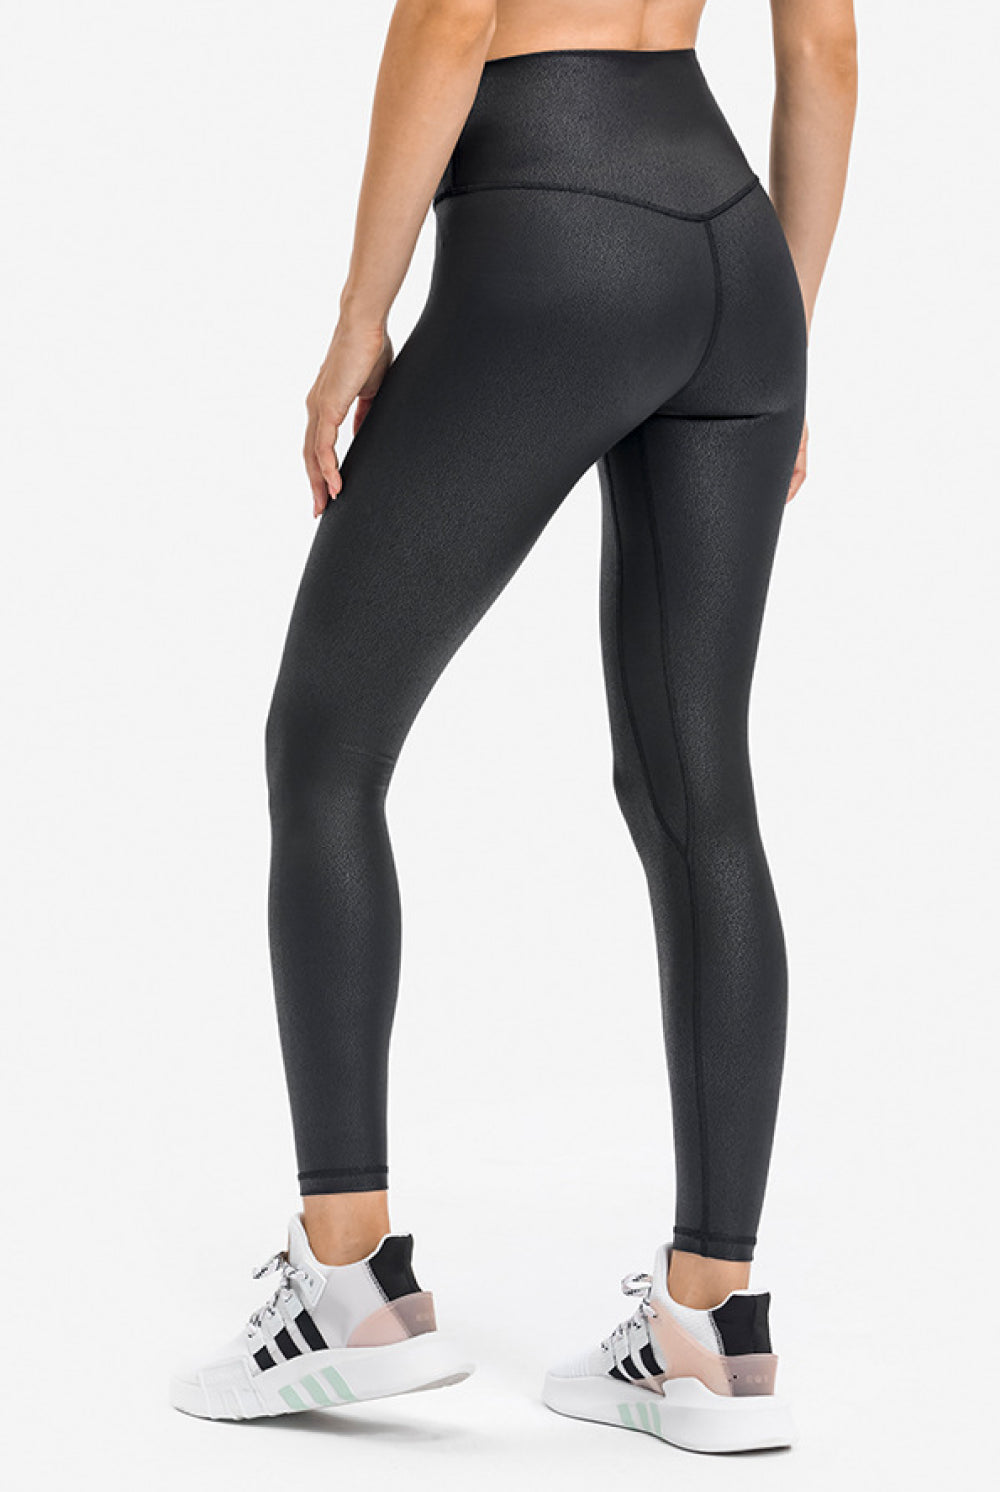 White Smoke Welcome To The Best Days Of My Life Invisible Pocket Sports Leggings Activewear